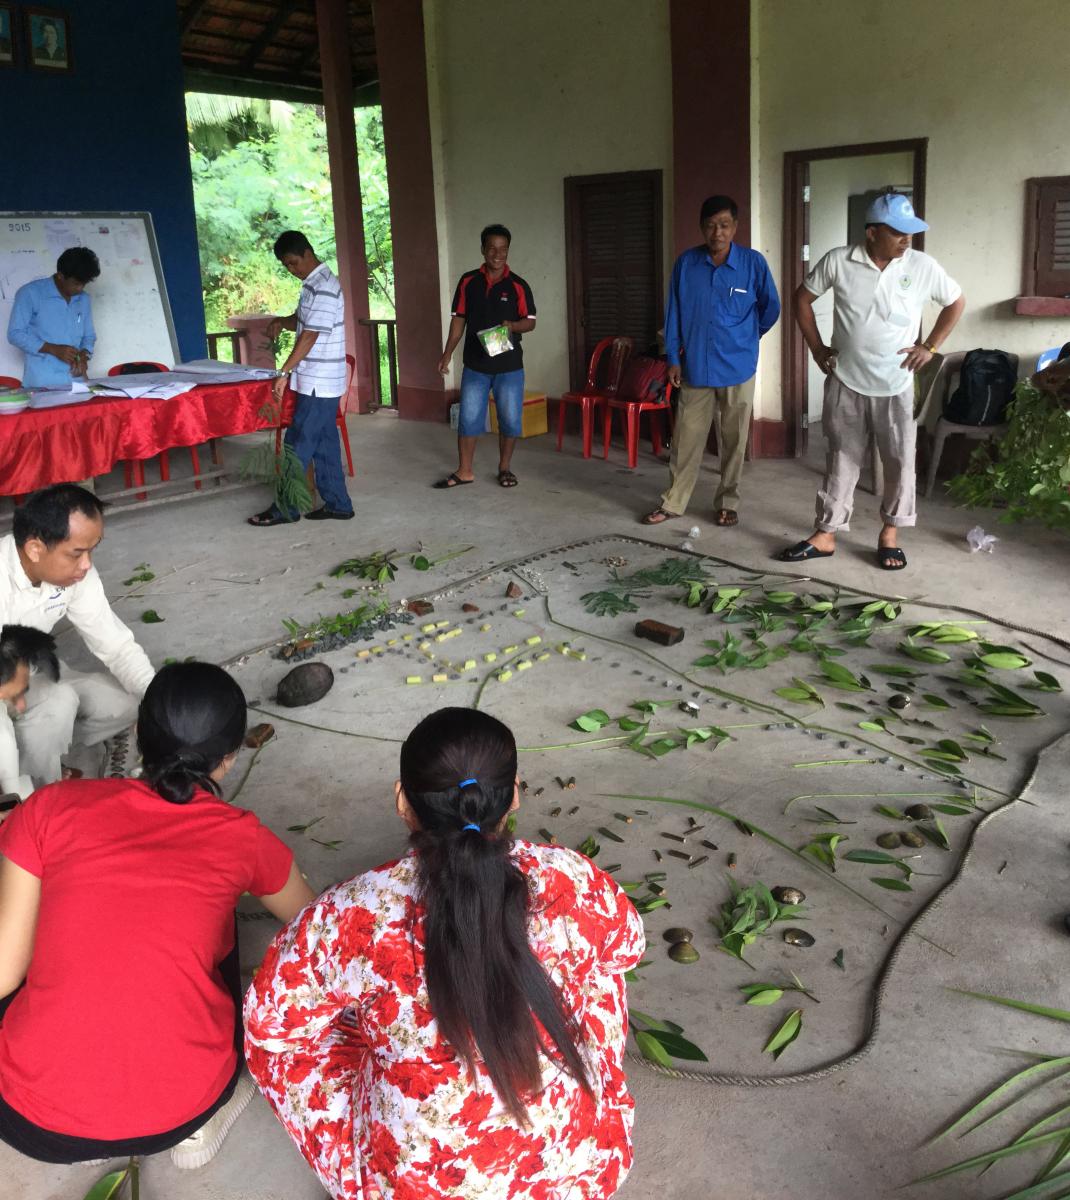 Villagers use the organic map to identify points of interest